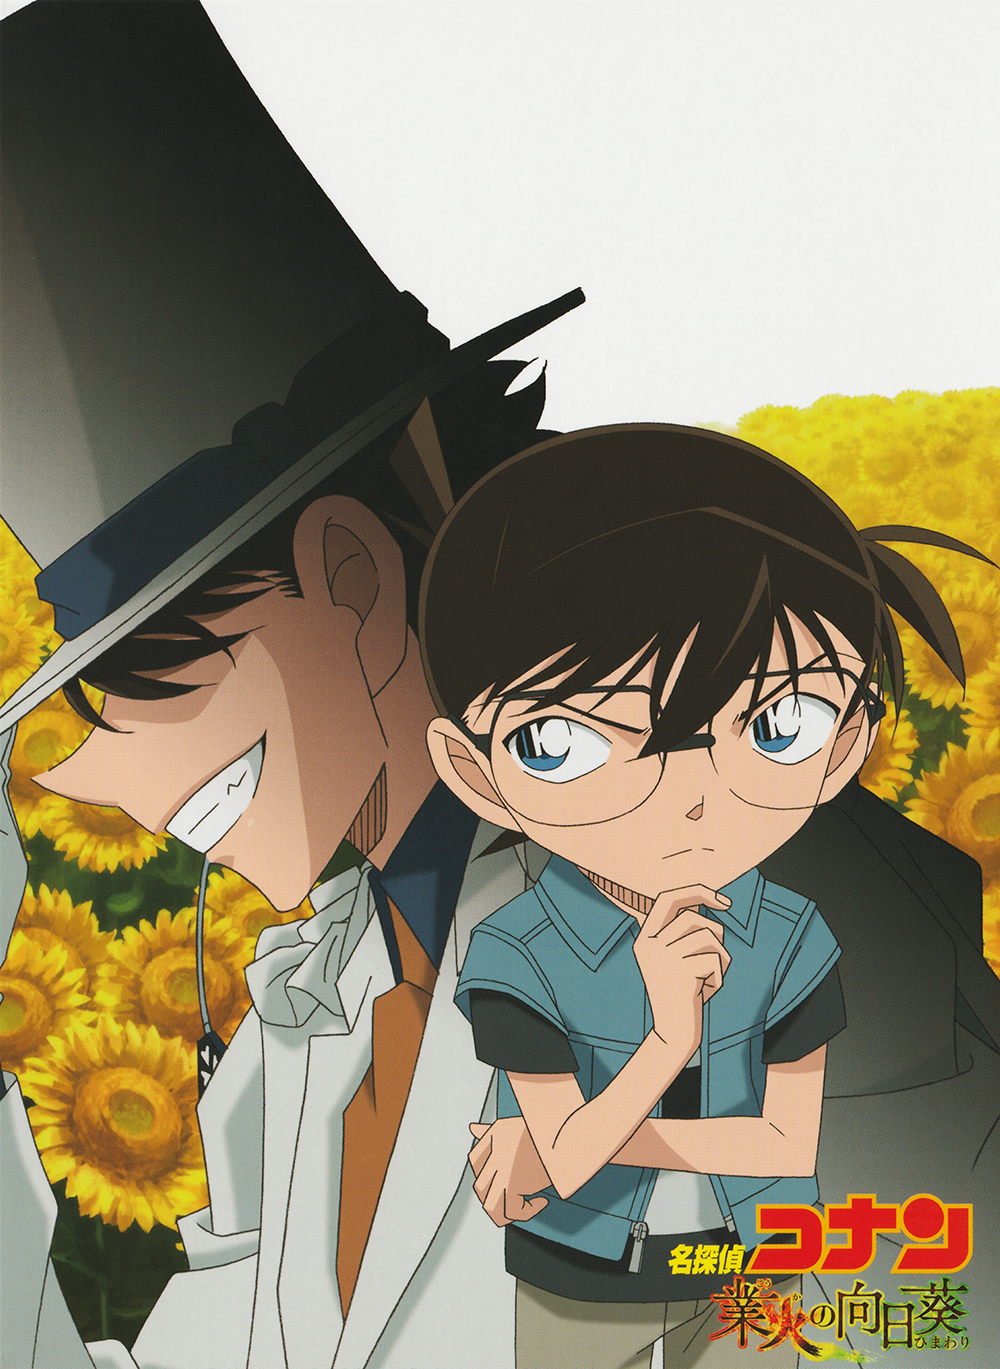 Detective Conan: Sunflowers Of Inferno Main Poster